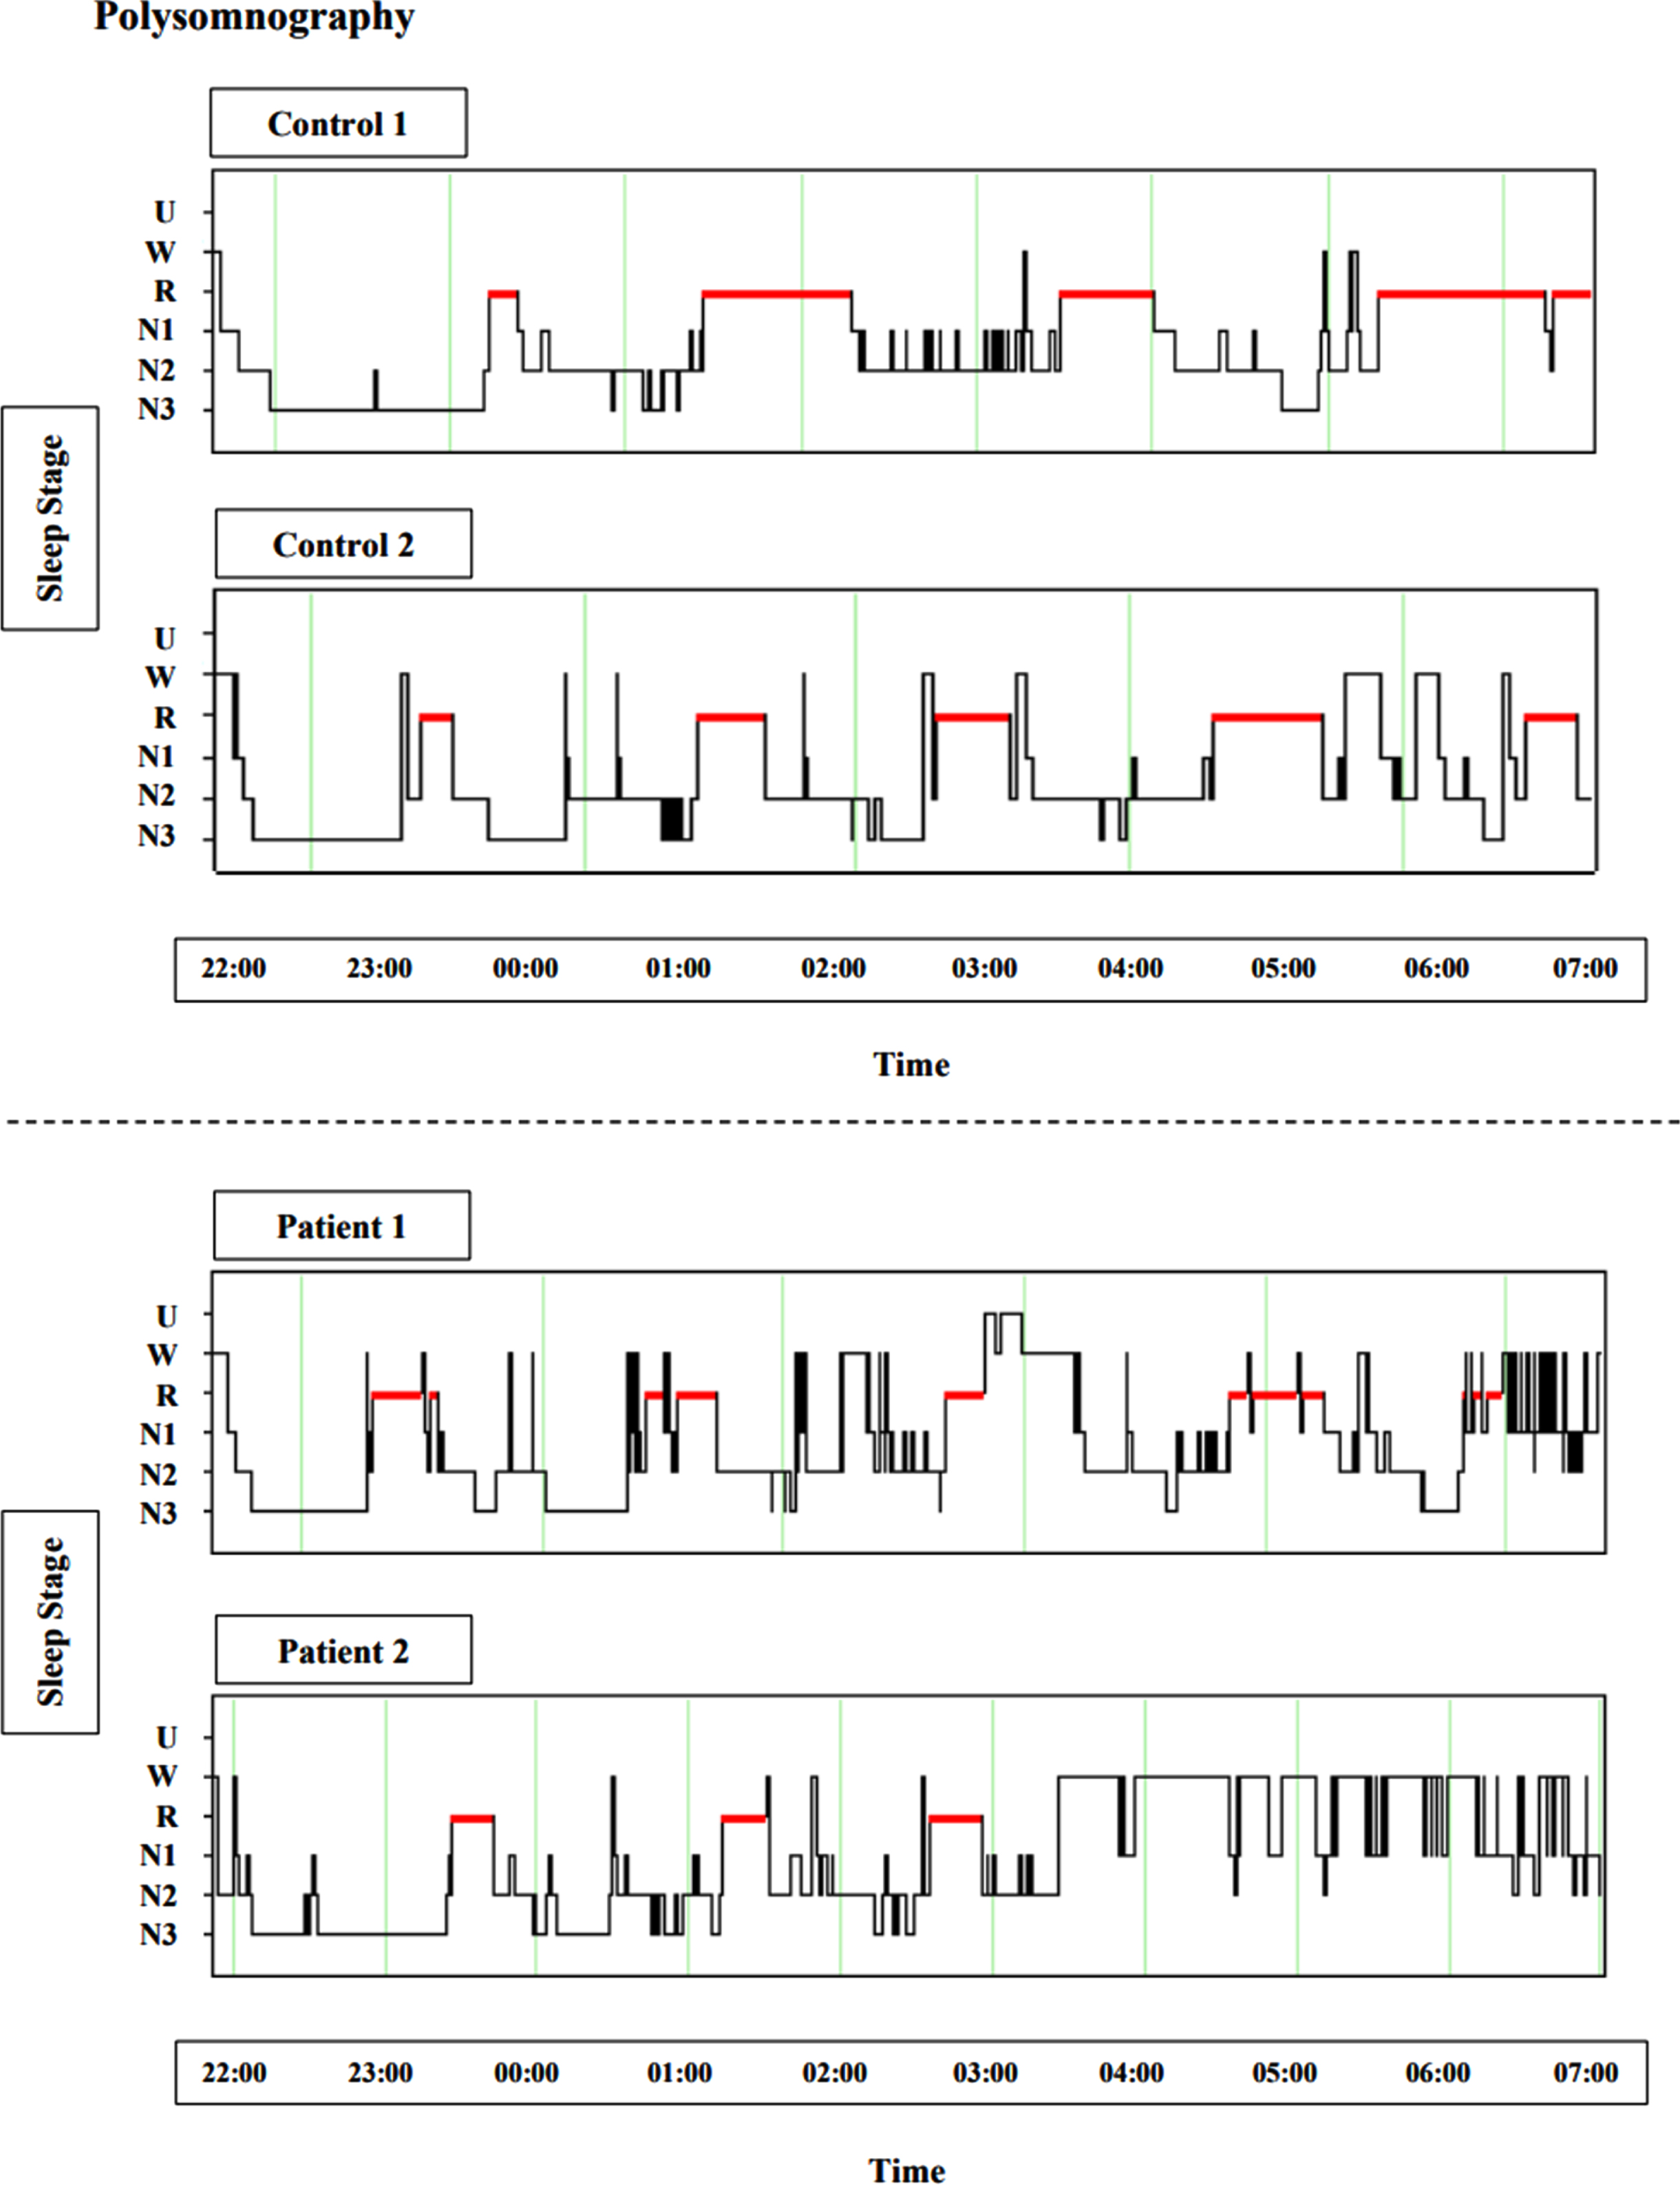 Polysomnography exhibiting insomnia and sleep architecture fragmentation in HD, sourced from ongoing research in our group (unpublished). Figures depict hypnograms from two control examples and two early manifest HD patient examples, between 22:00 and 07:00. U, unscored; W, wake; R, rapid eye movement (red); N1, stage 1 sleep; N2, stage 2 sleep; N3, slow wave sleep.